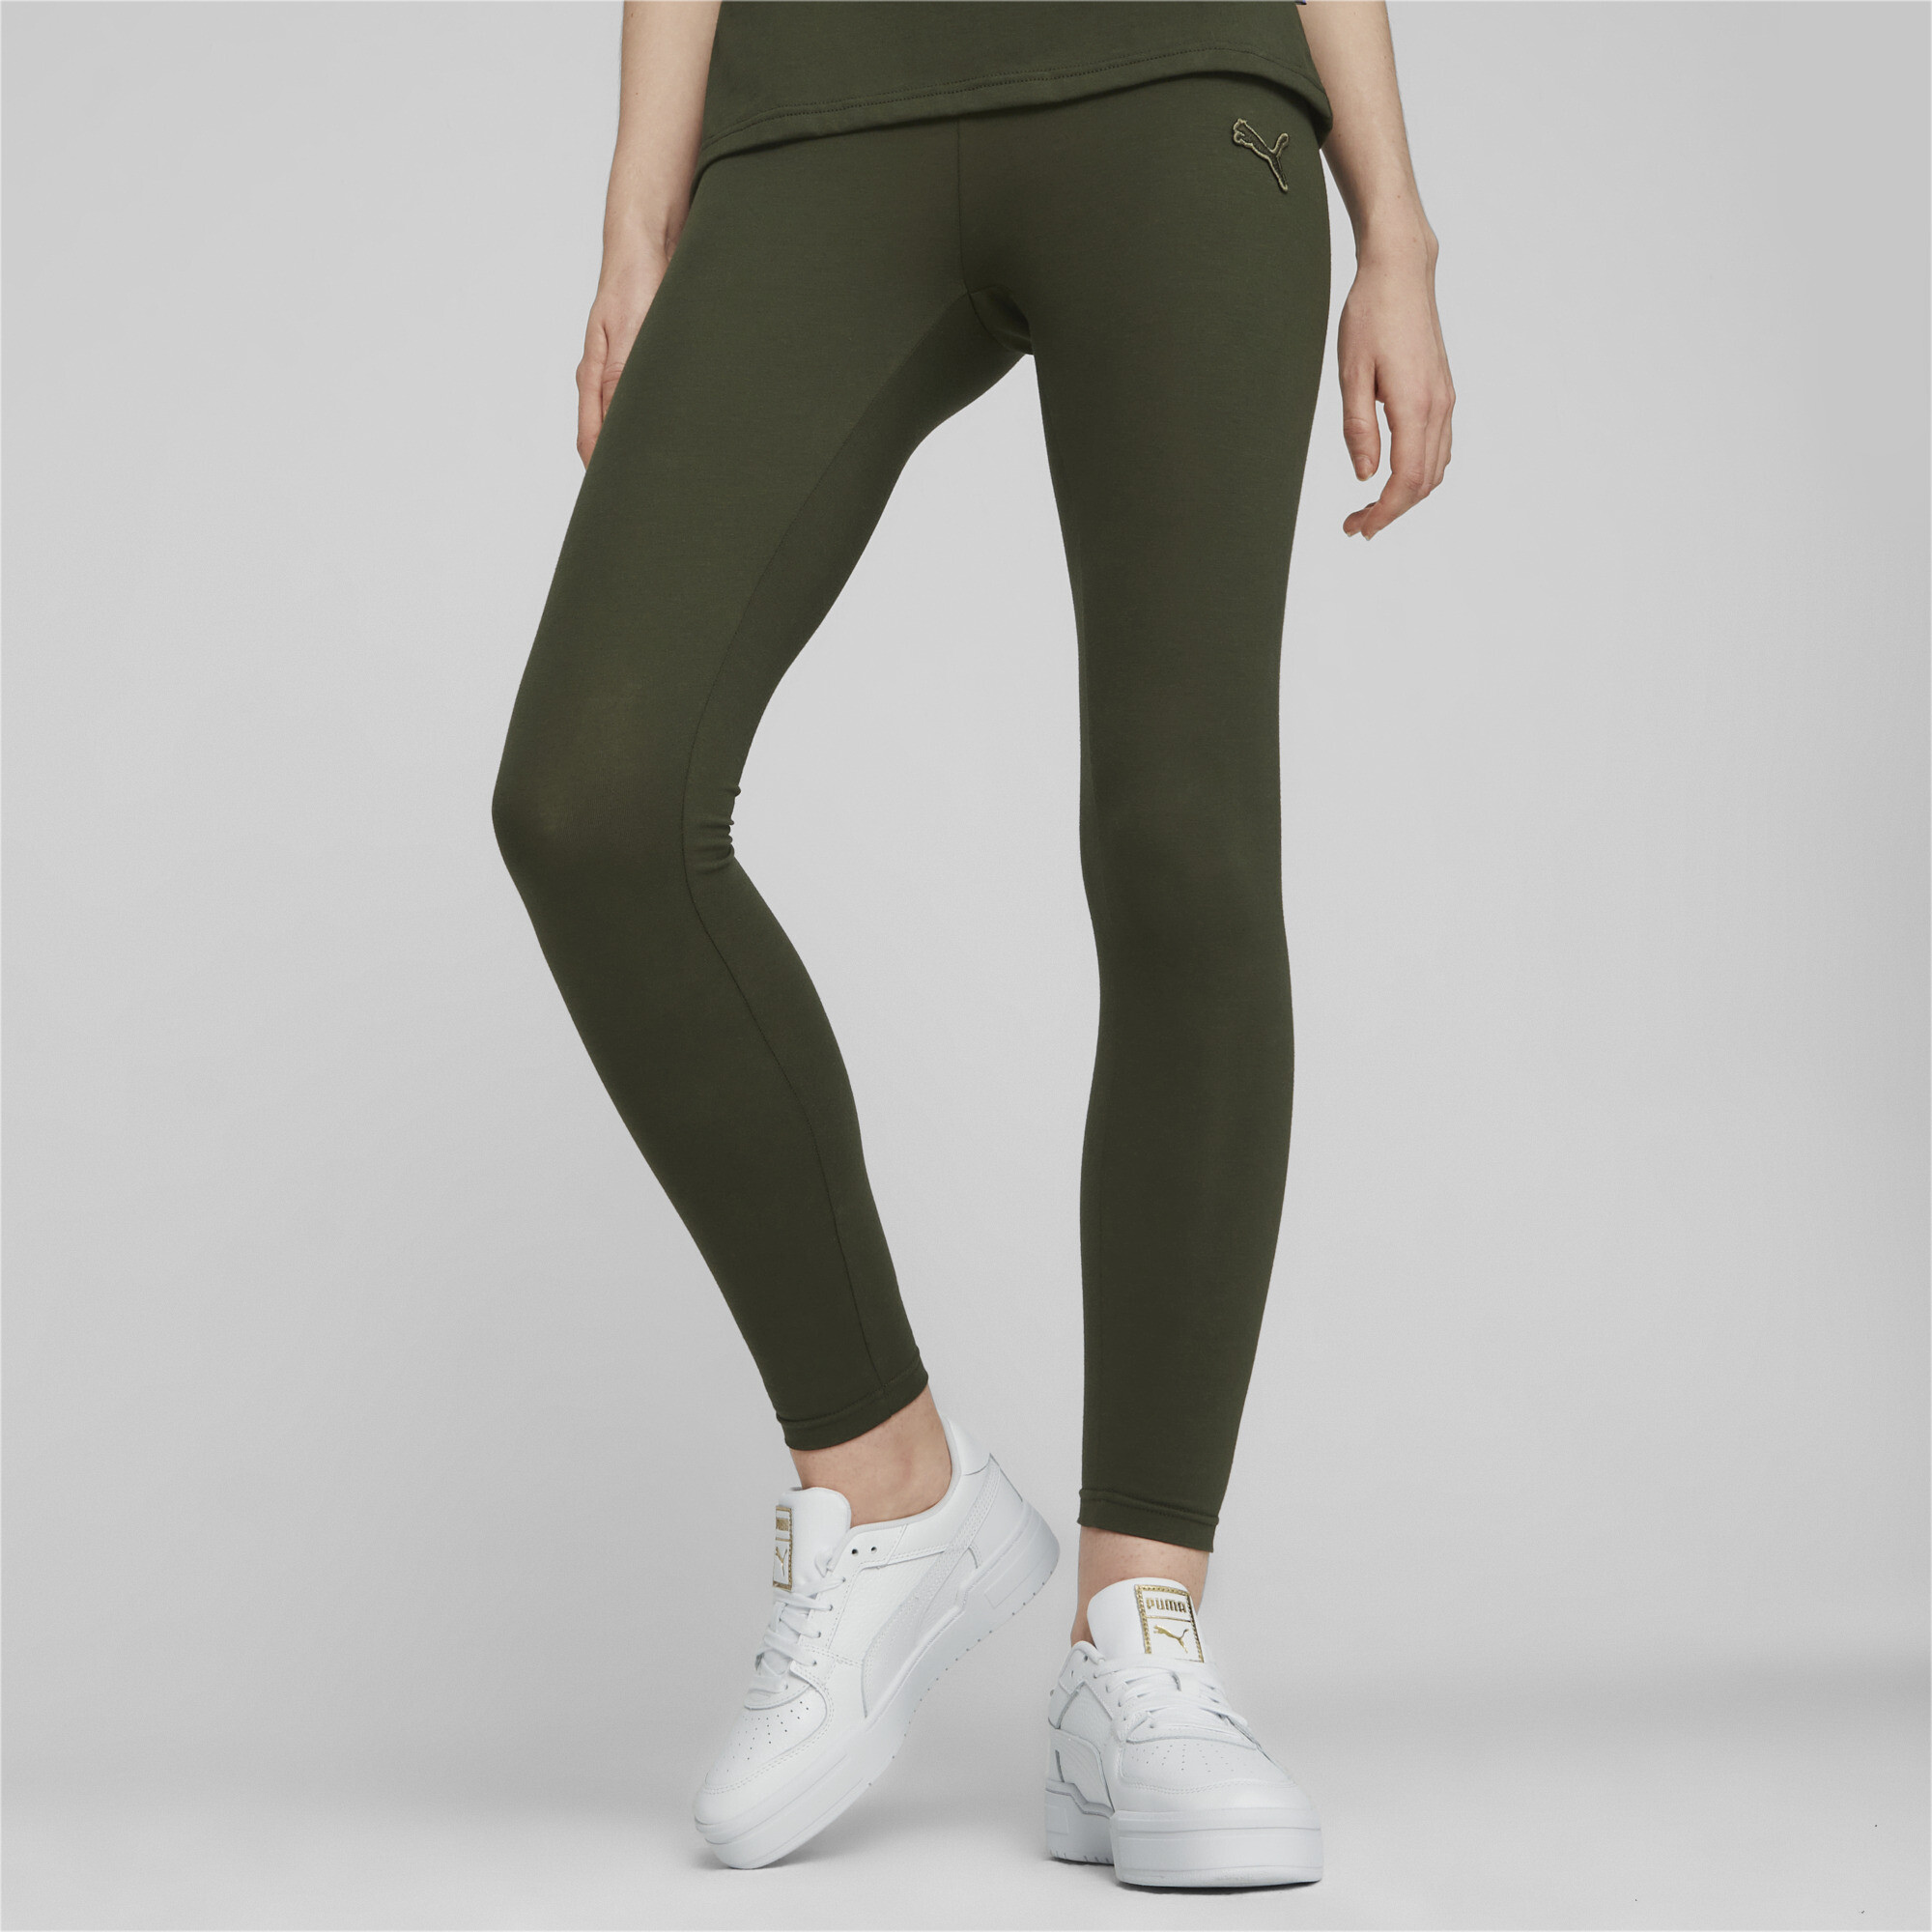 Women's Puma Made In France Leggings, Green, Size L, Clothing